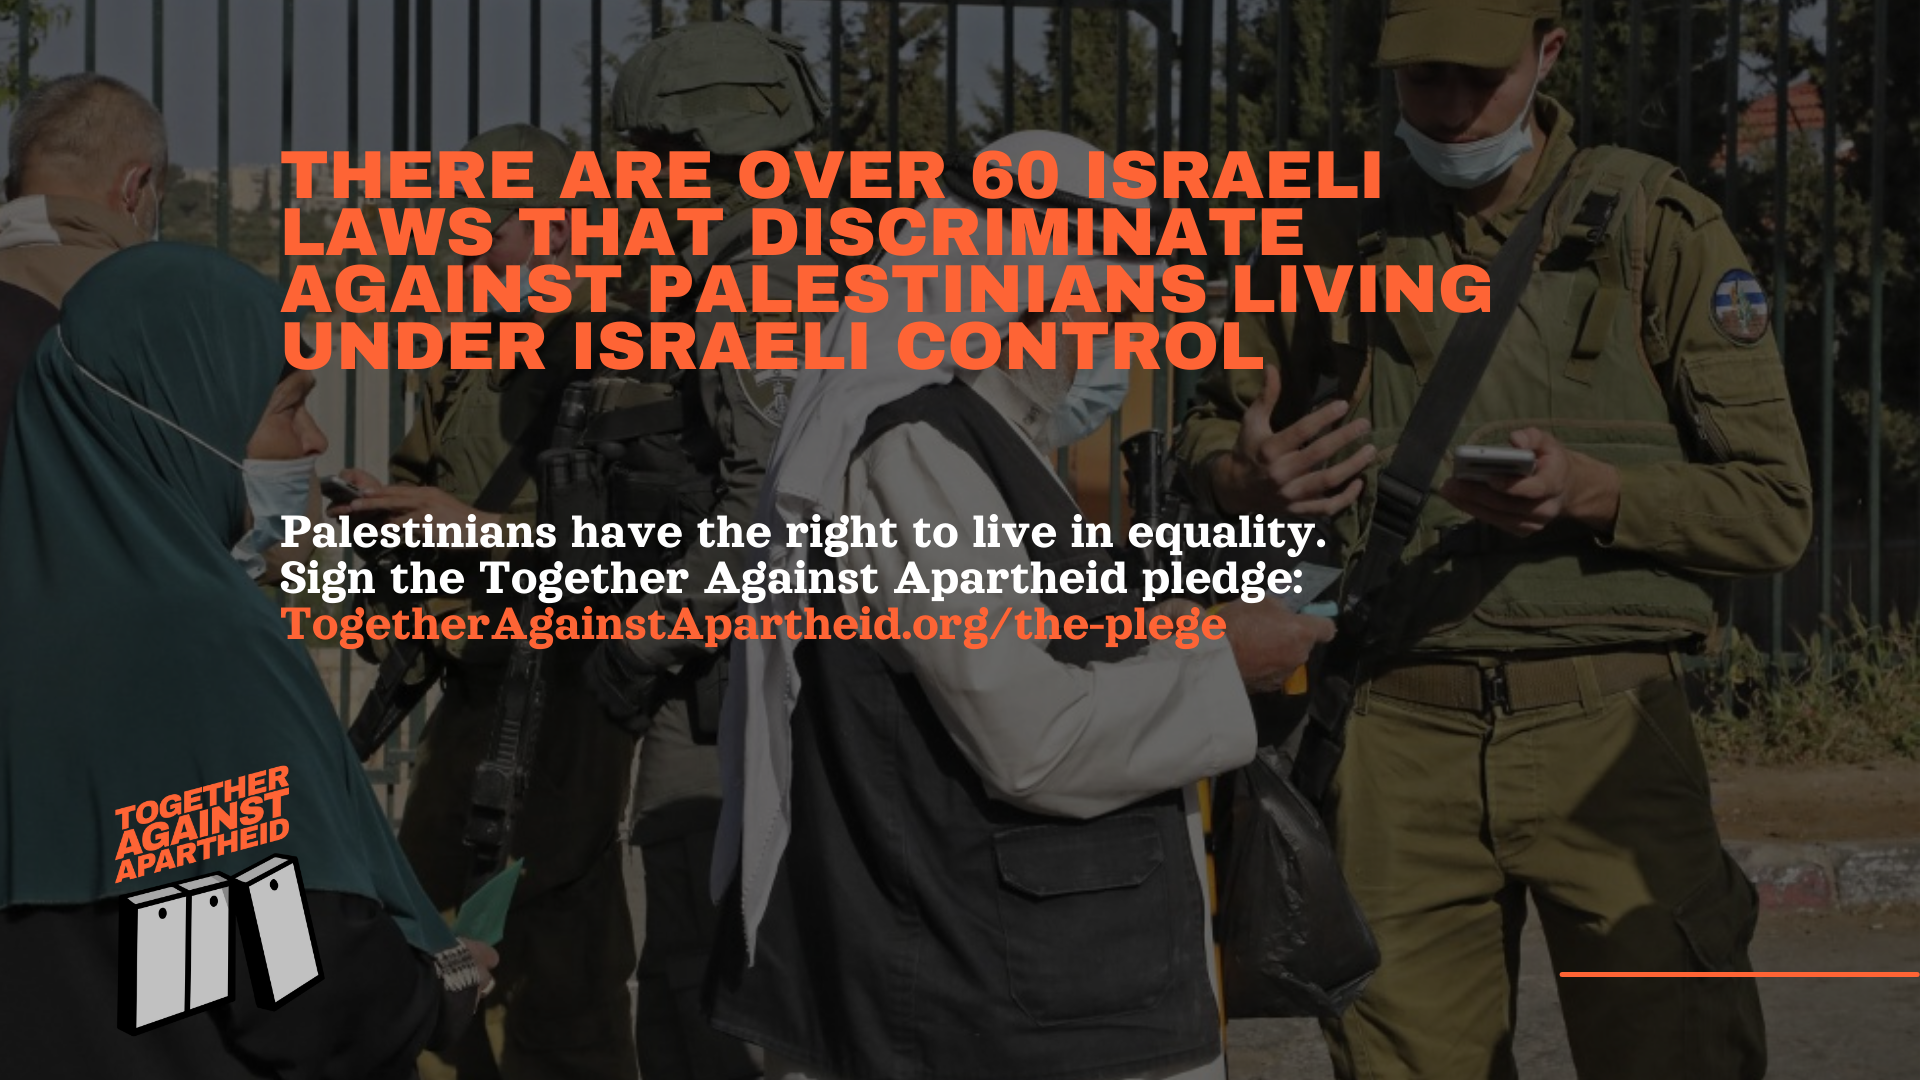 There are over 60 Israeli laws that discriminate against Palestinians living under Israeli control. Palestinians have the rights to live in equality. Sign the Together Against Aparheid pledge: https://togetheragainstapartheid.org/the-pledge